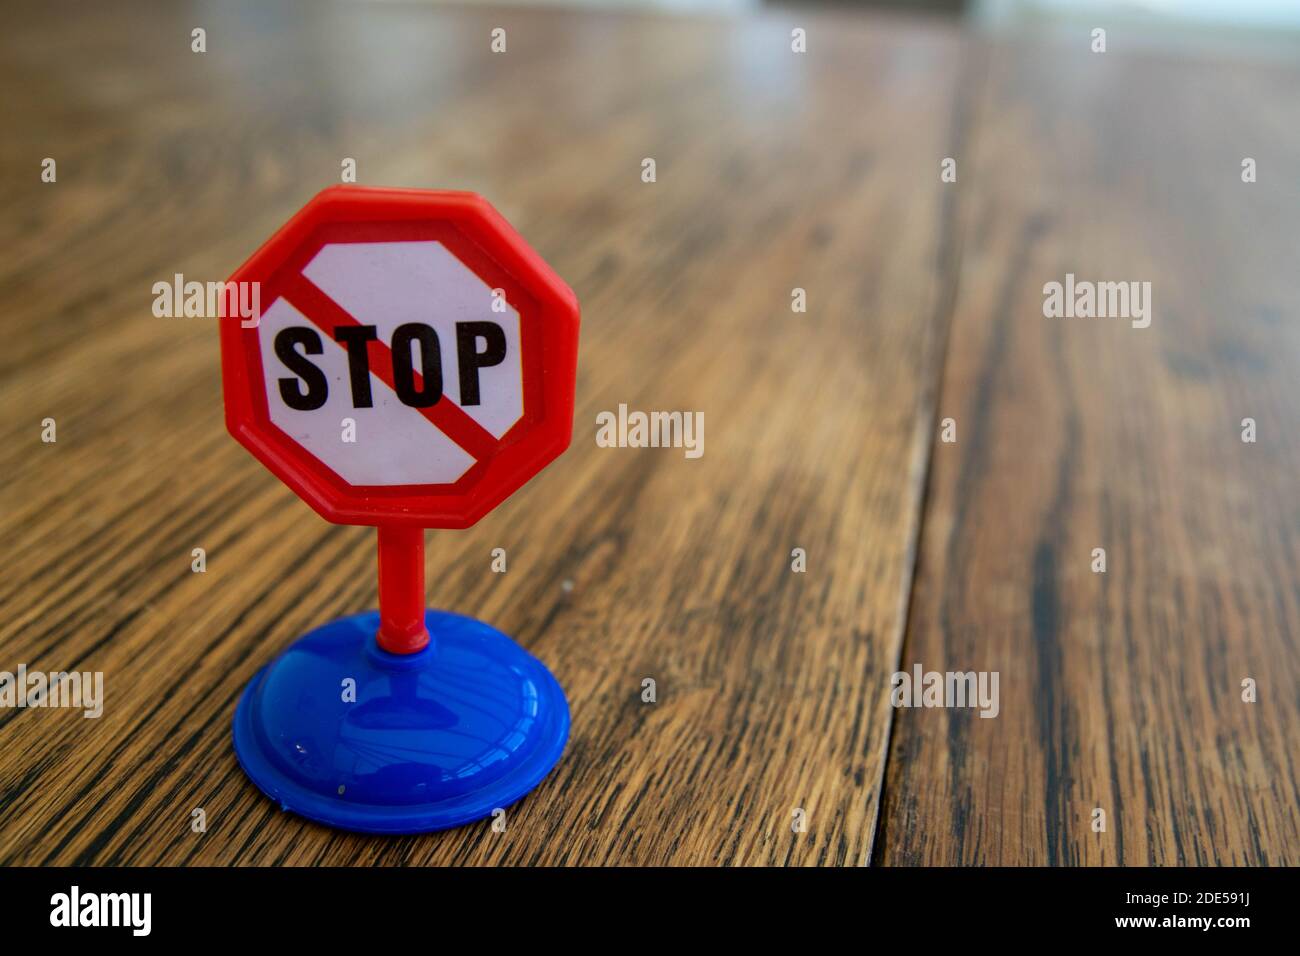 Isolated plastic toy warning sign - STOP. Danger ahead, do not enter, forbidden, construction sight, road sign, signpost concept background. Isolated Stock Photo